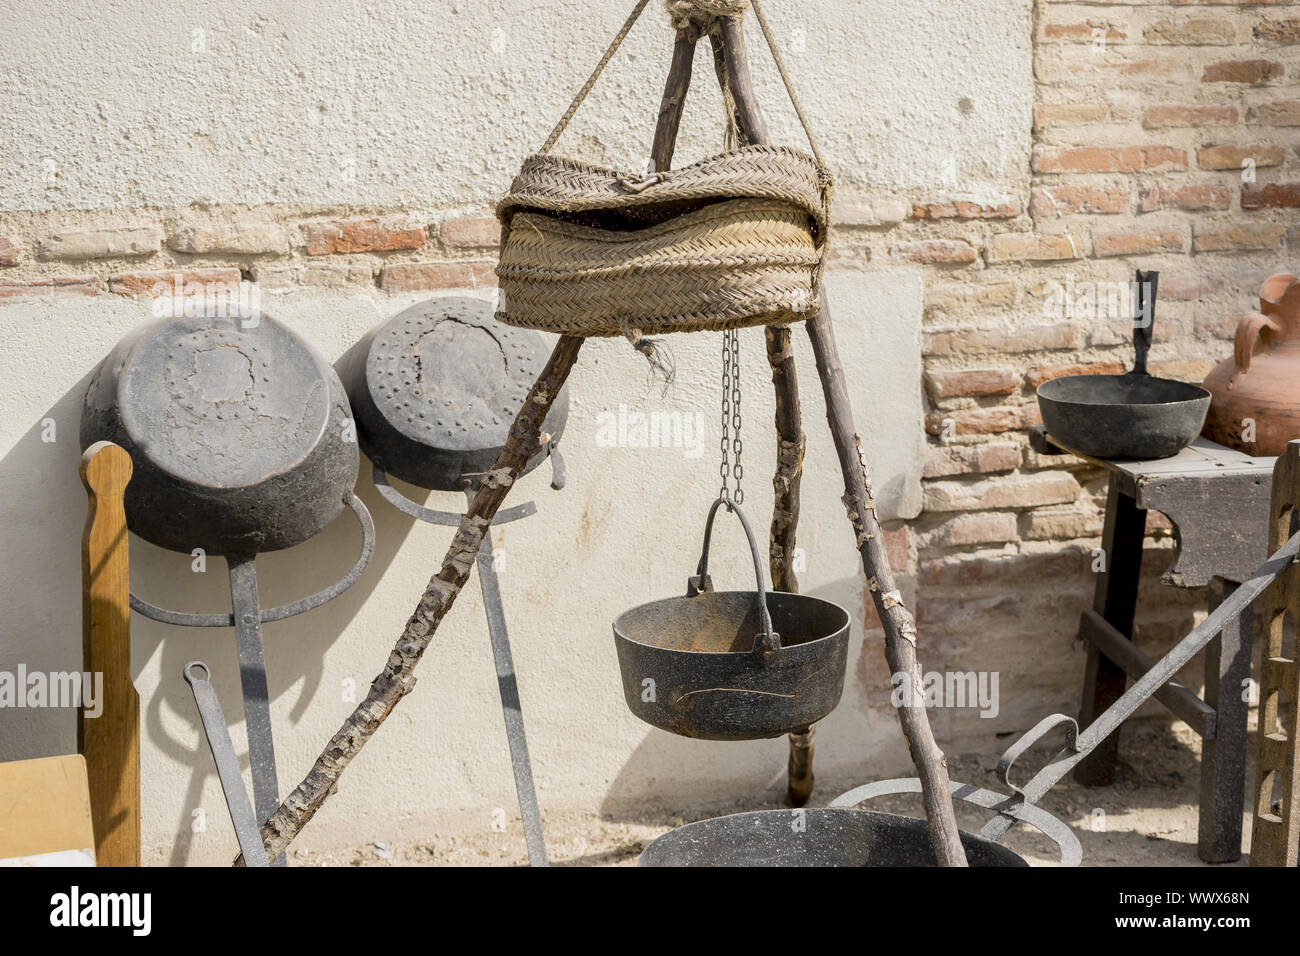 Cook tools and utensils of medieval agriculture, ancient European farming instruments Stock Photo